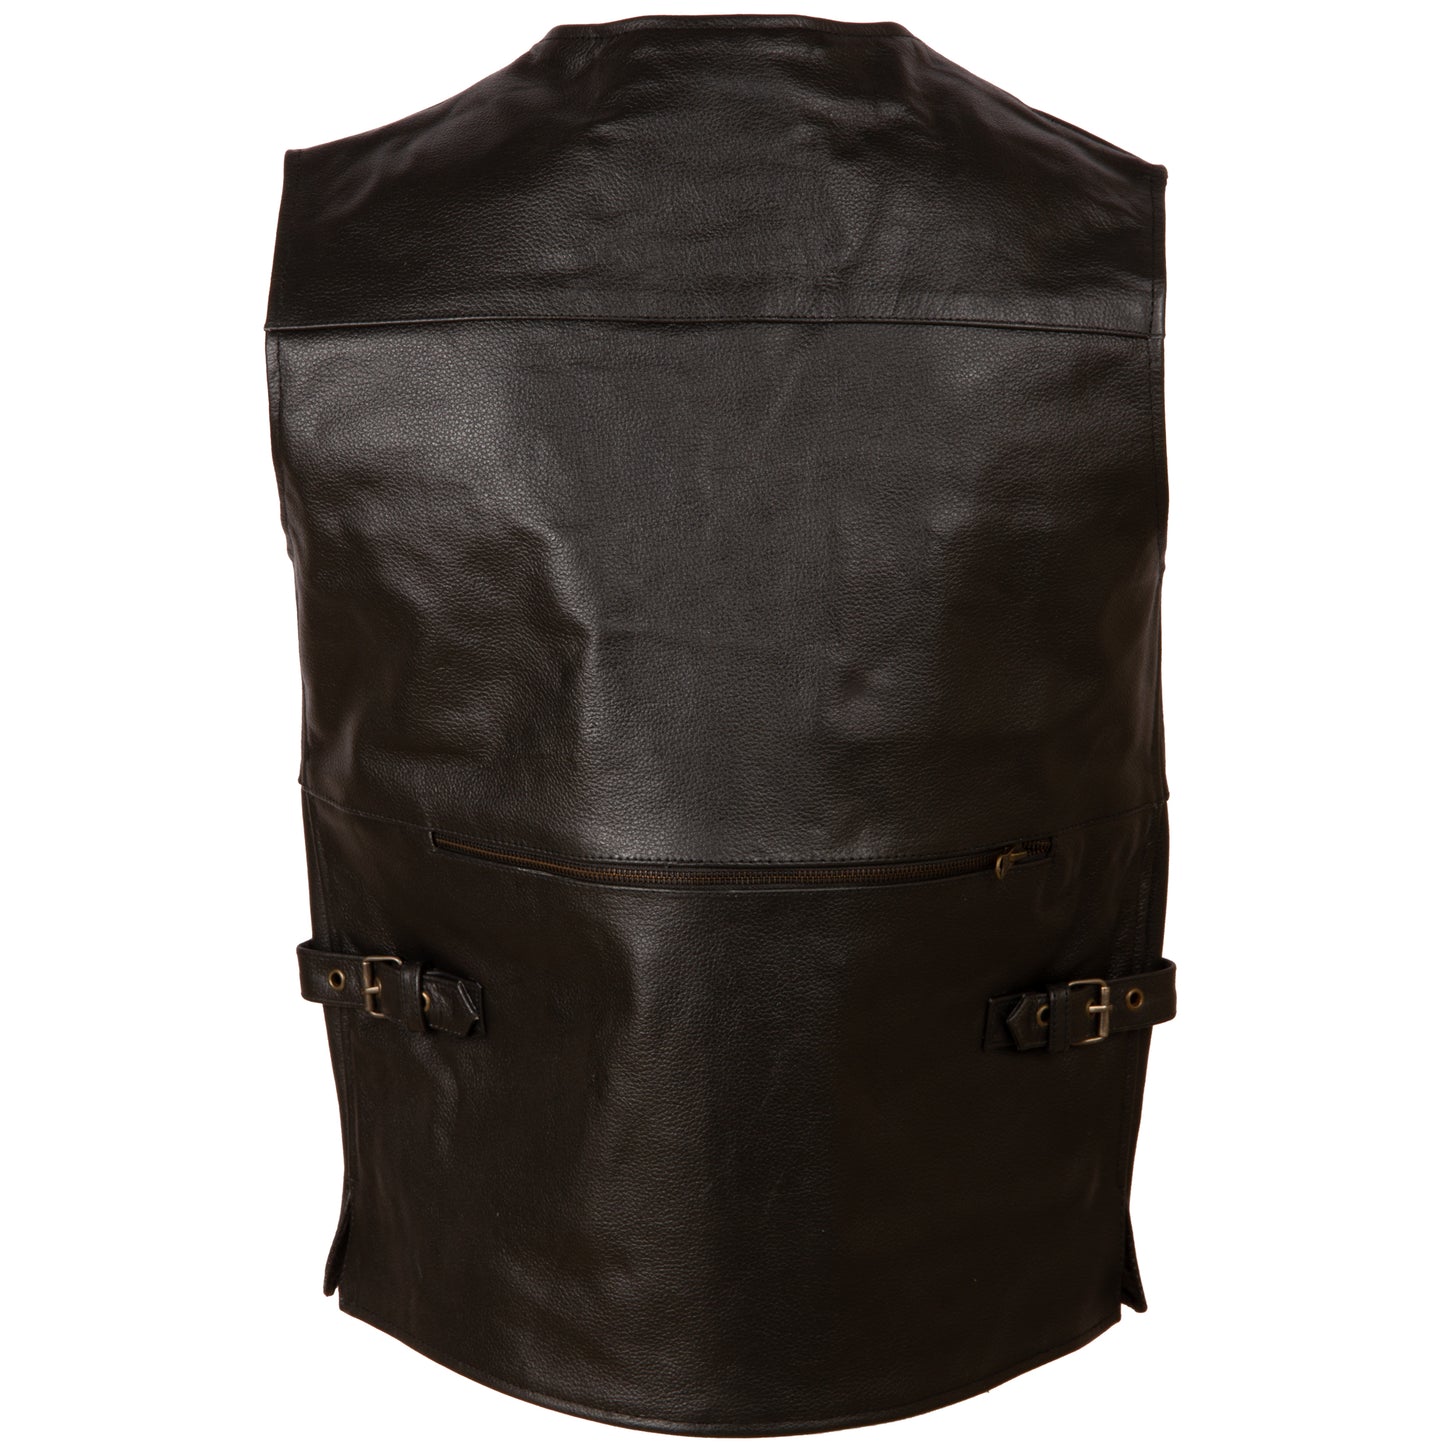 Aviatrix Men's Real Leather Fishing Travel Outdoor Hunting Waistcoat (TJUP) - Black Cow Hide